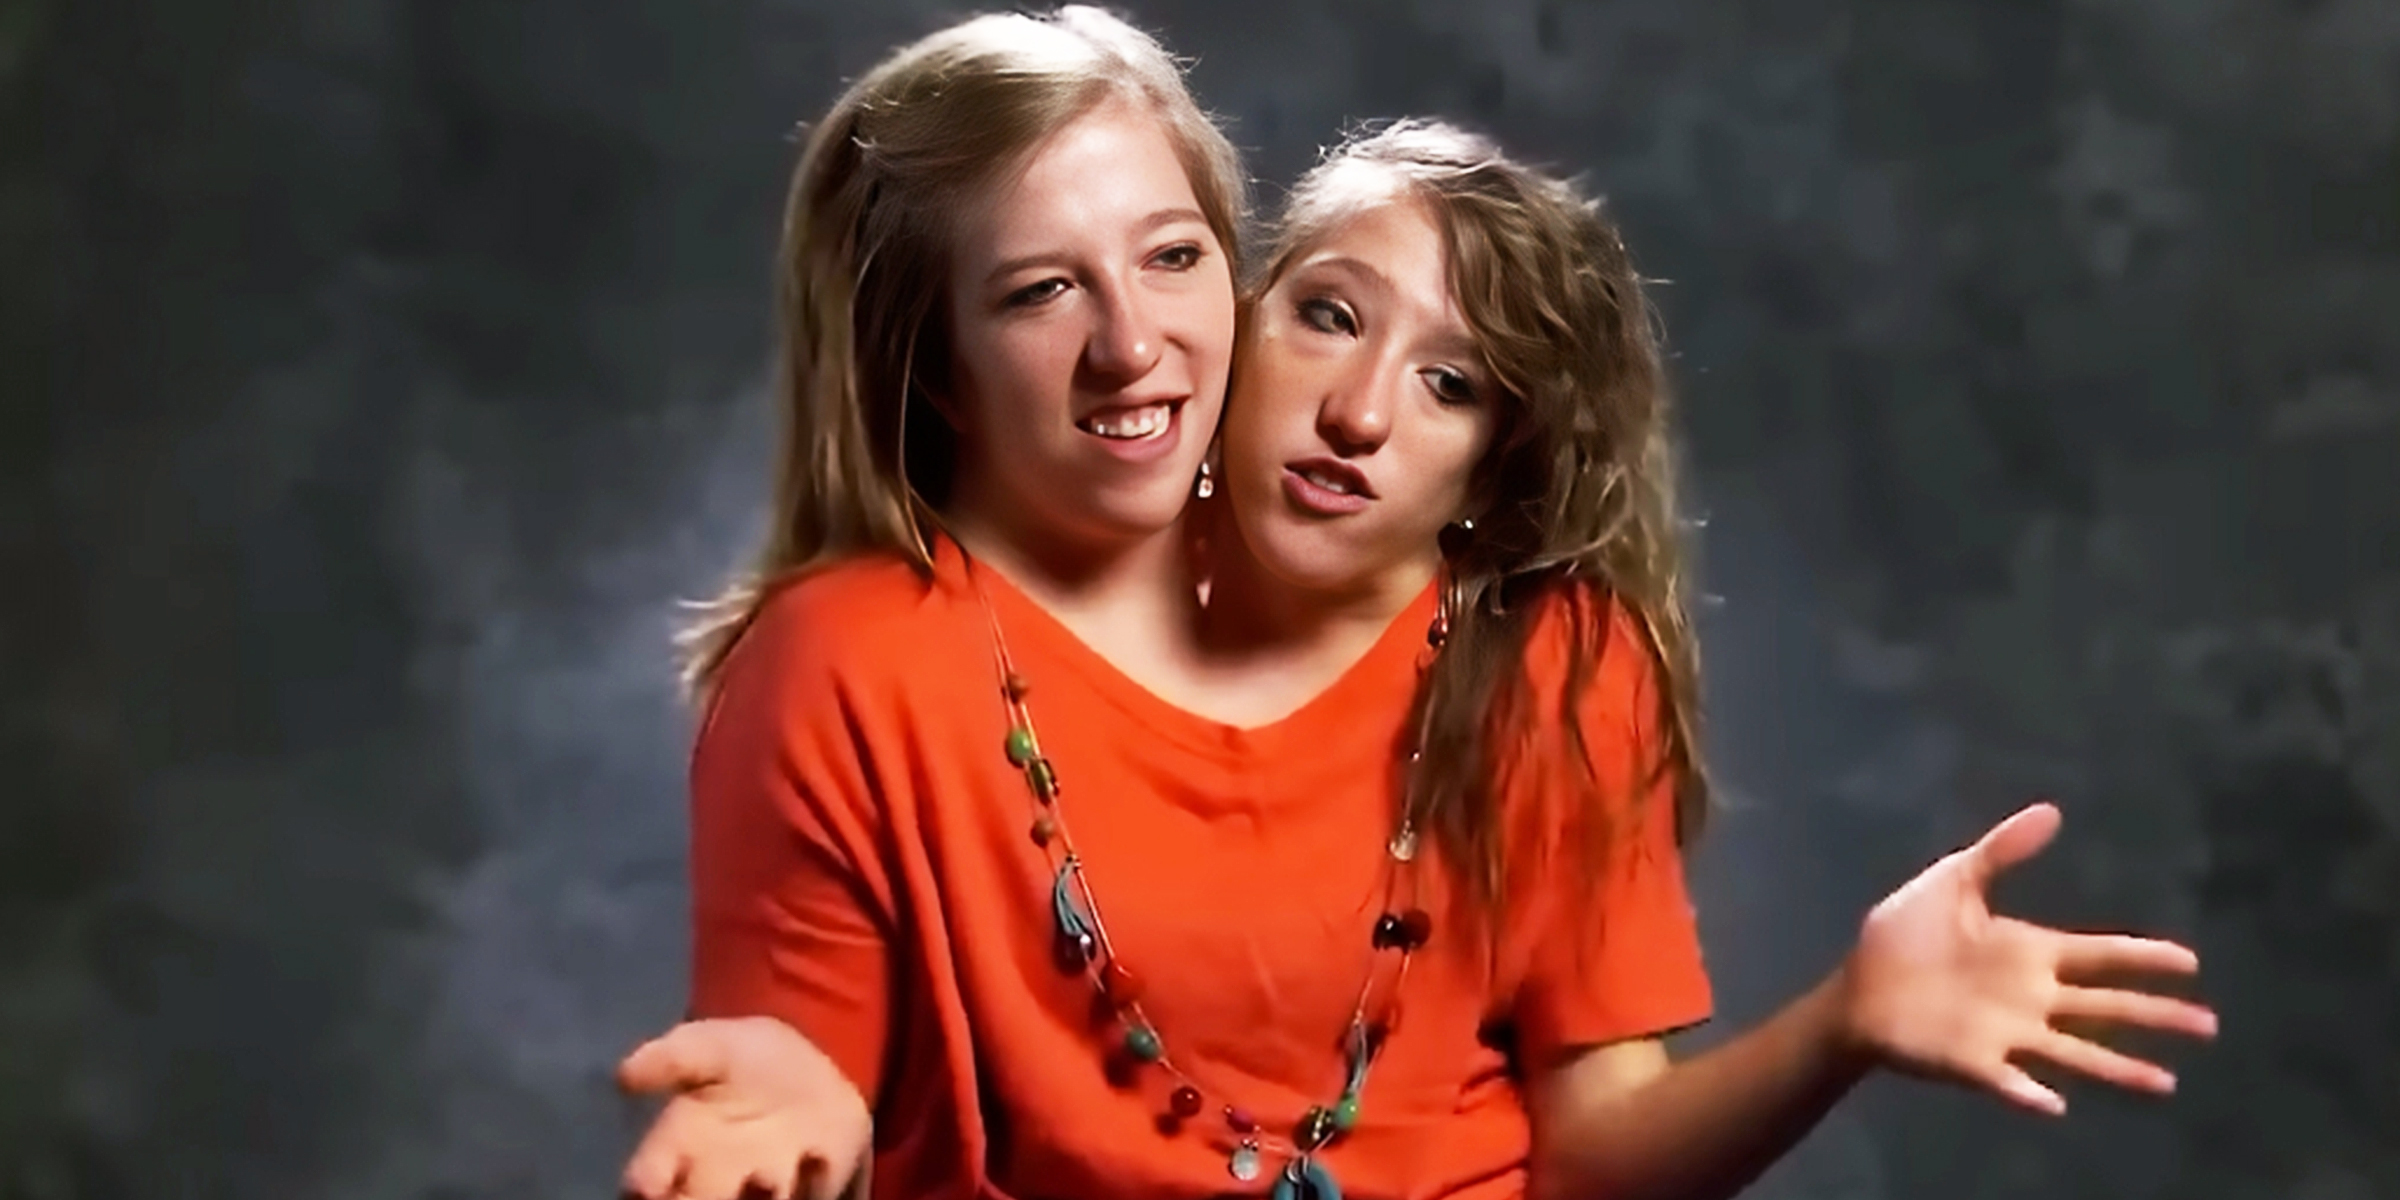 Conjoined twins Abby and Brittany Hensel | Source: YouTube/screenshutterr